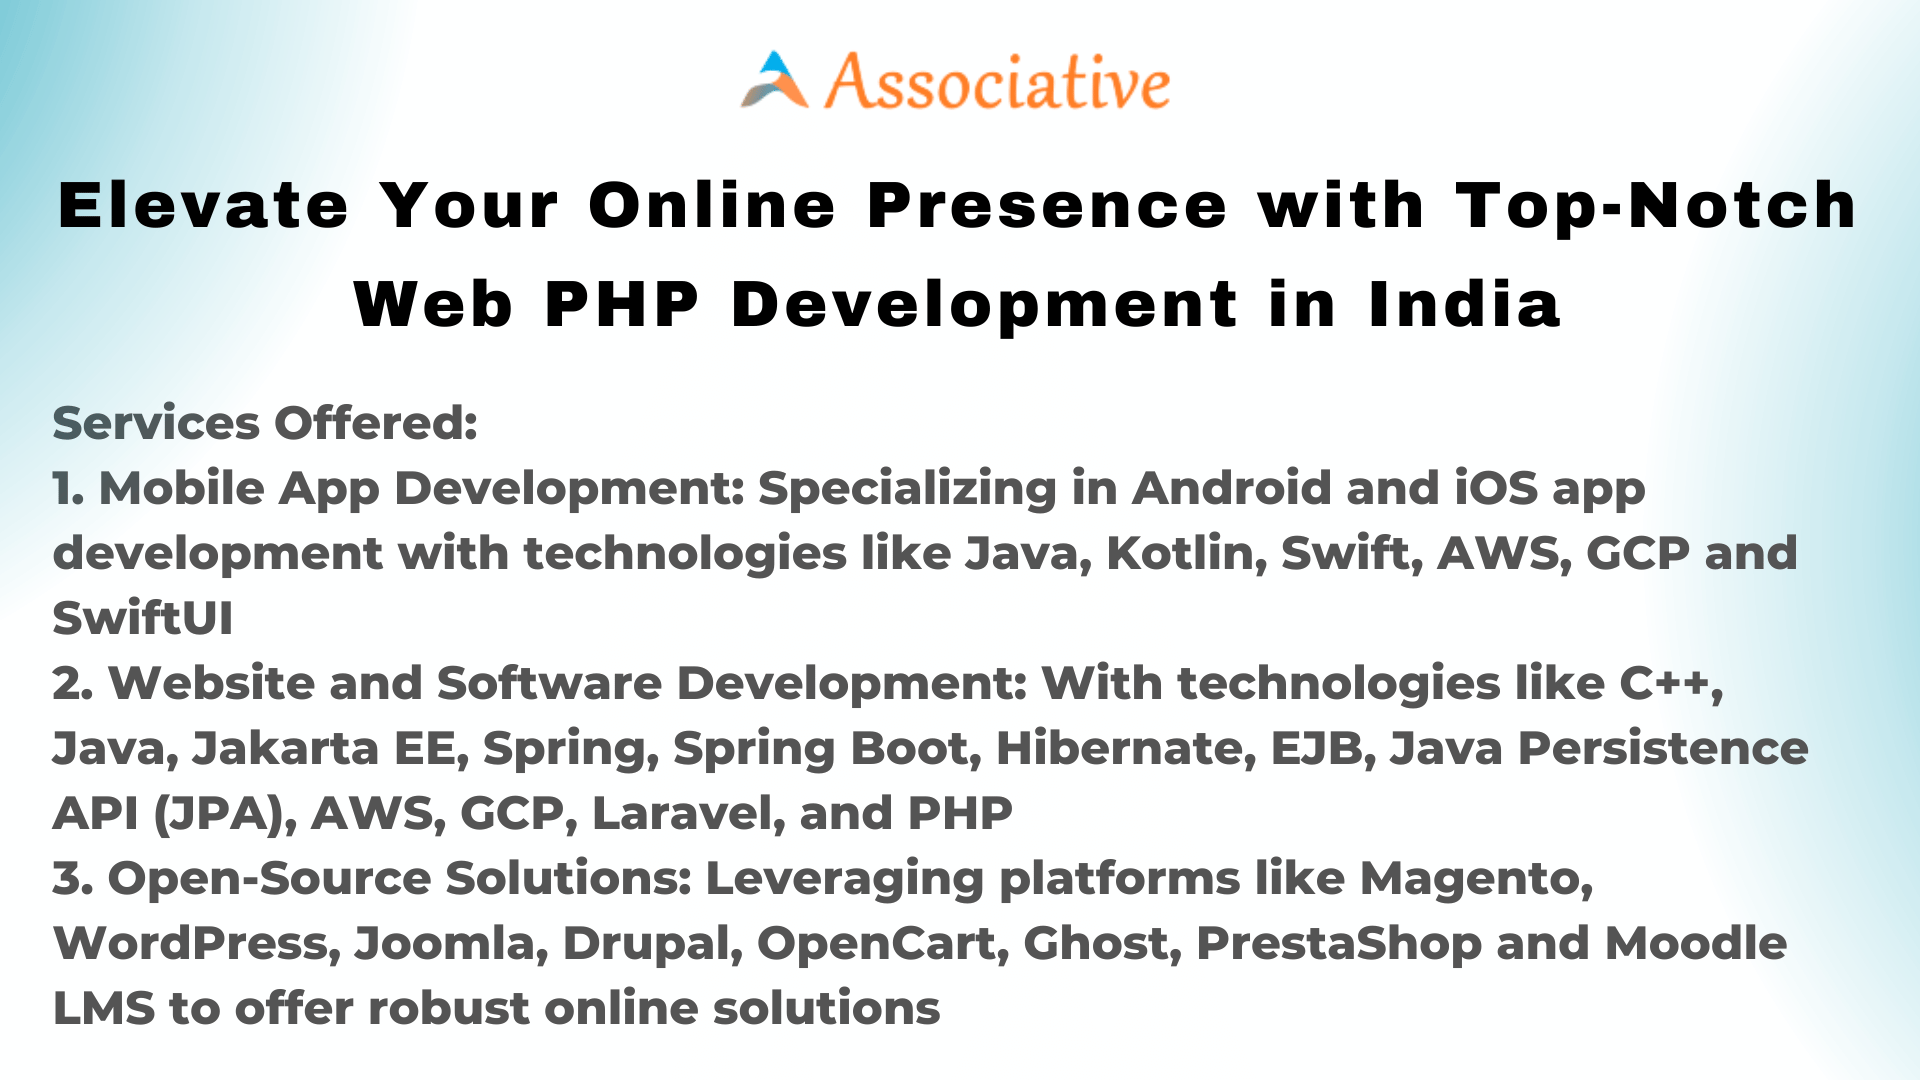 Elevate Your Online Presence with Top-Notch Web PHP Development in India